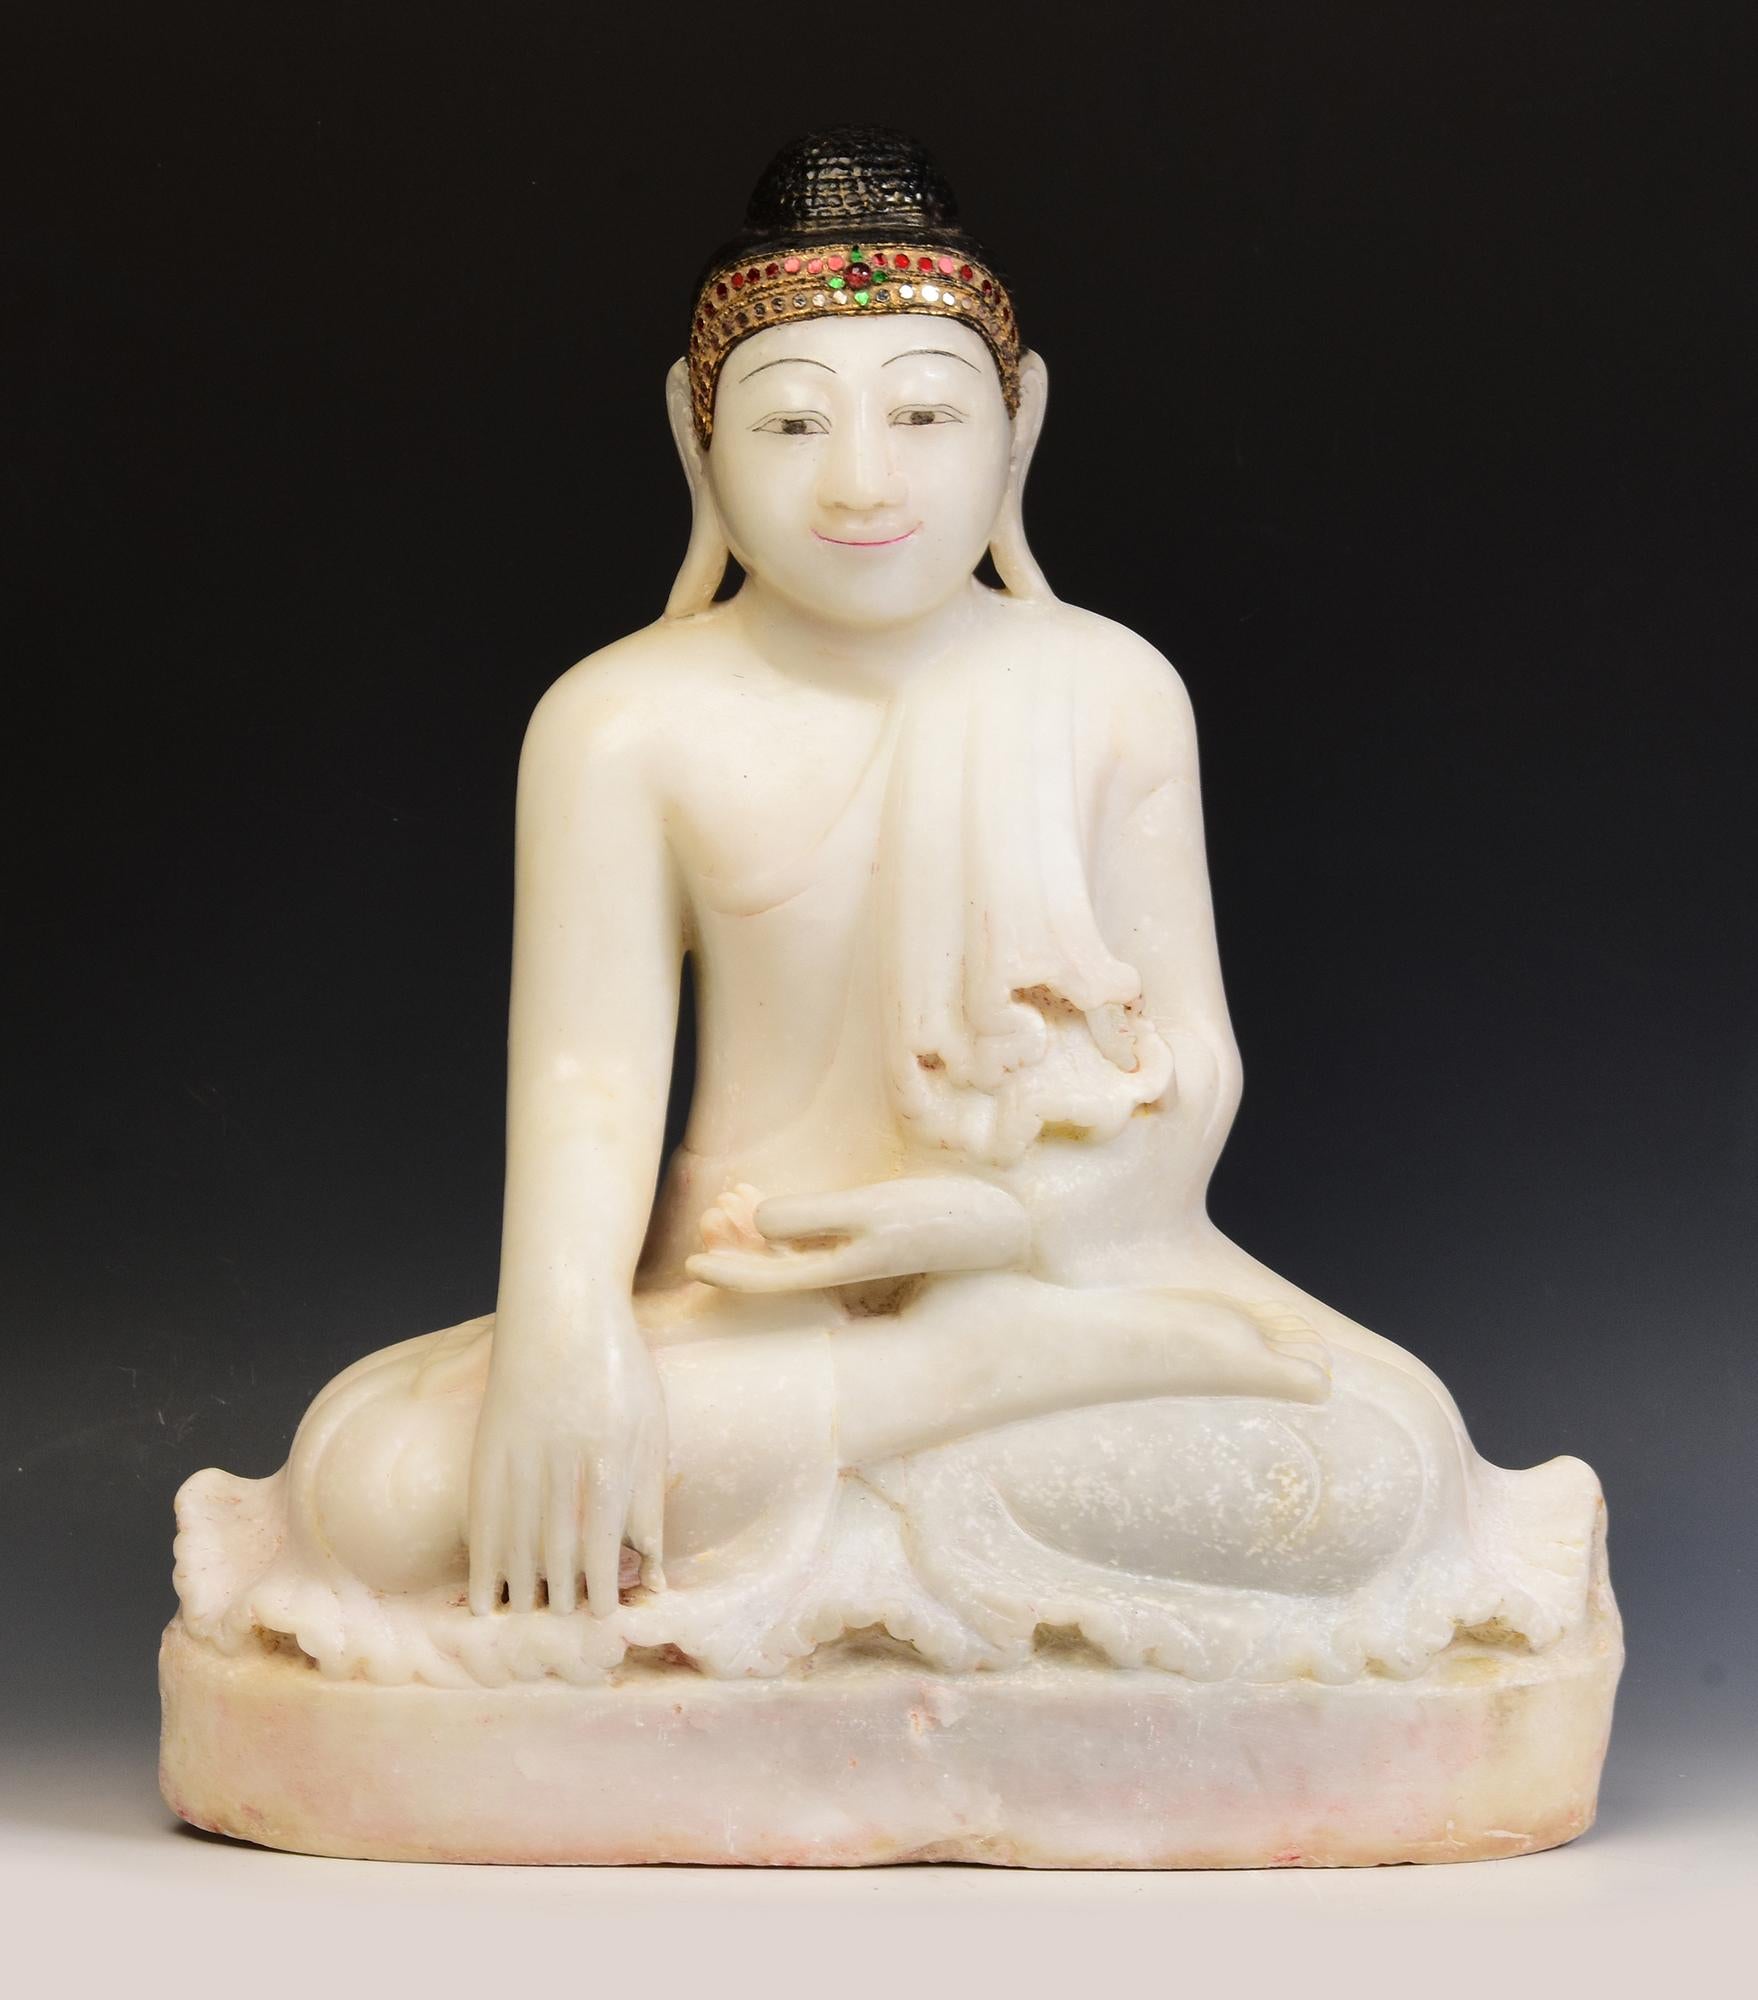 Antique Burmese alabaster Buddha sitting in Mara Vijaya (calling the earth to witness) posture on a base, with inlay of colorful glass pieces on the headband.

Age: Burma, Mandalay Period, 19th Century
Size: Height 53 C.M. / Width 54.5 C.M. / Depth